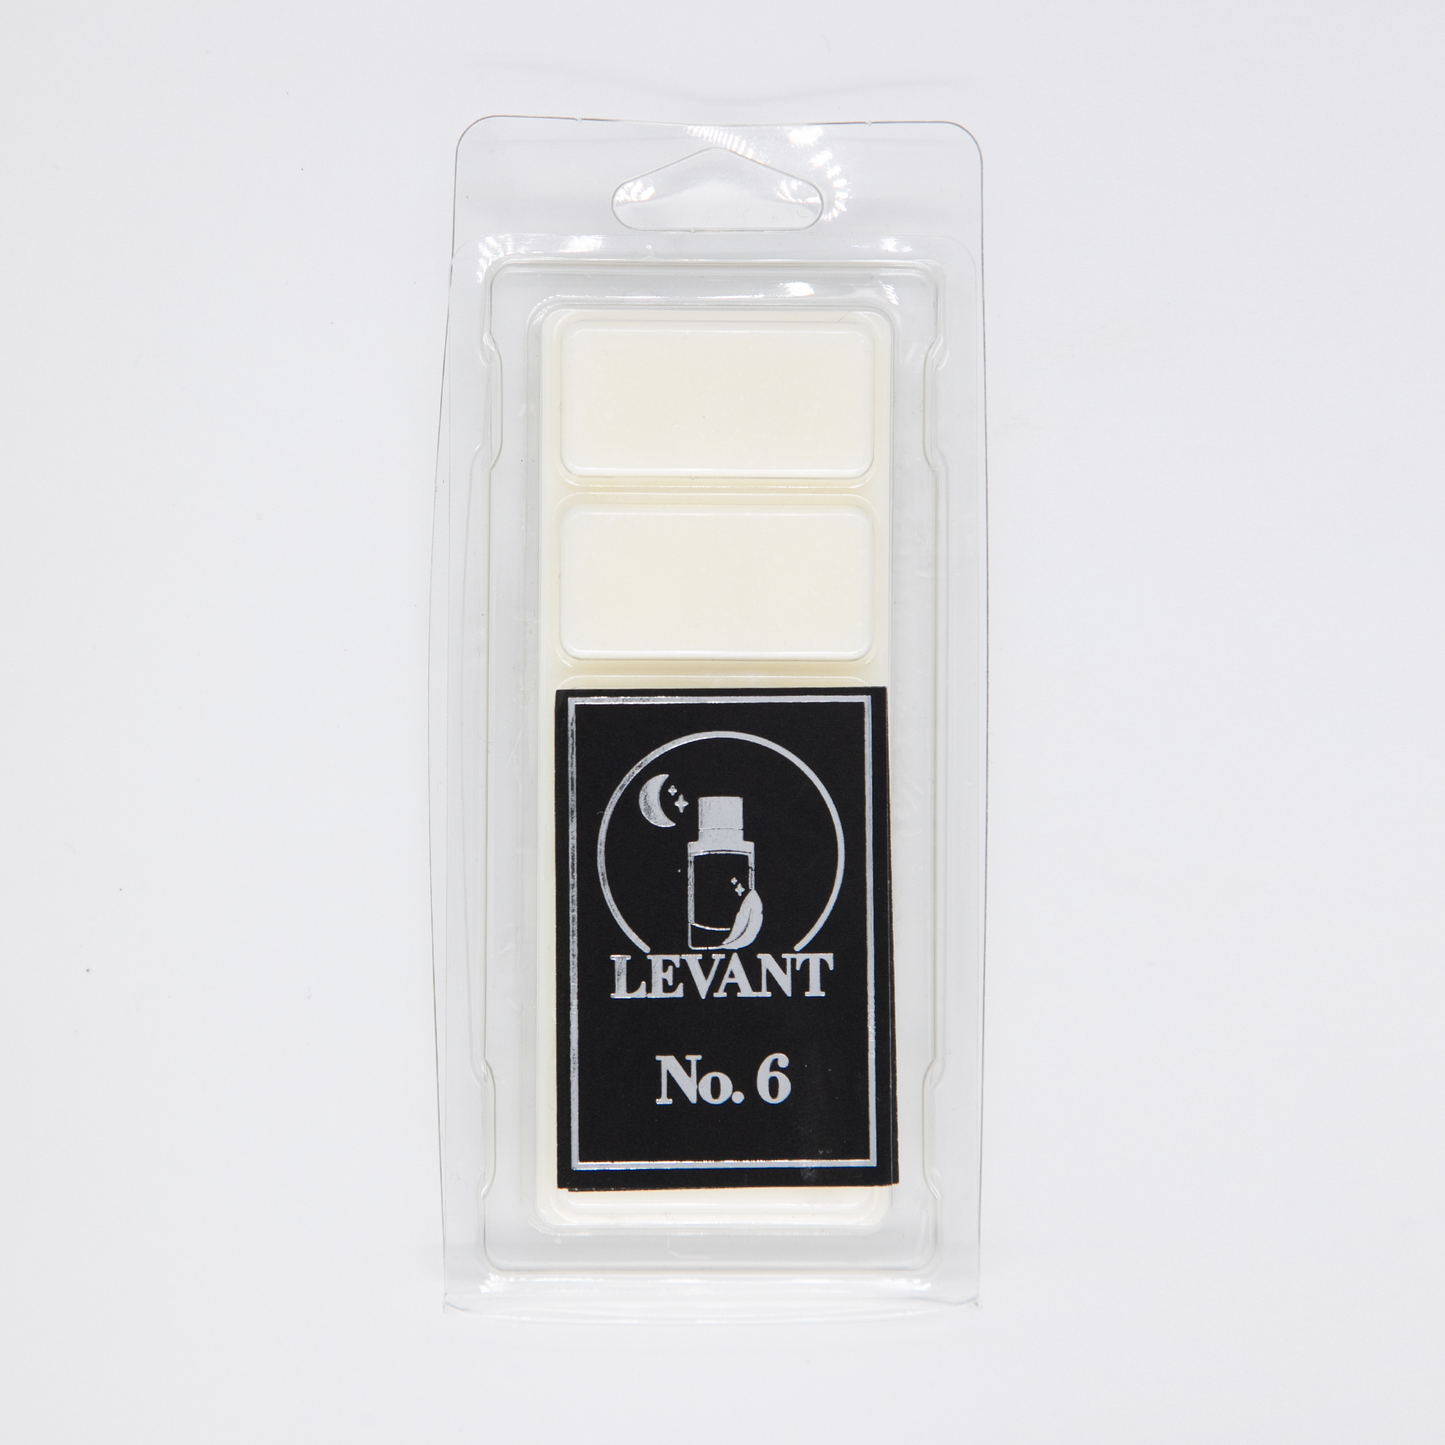 Wax Melt No. 6 with packaging